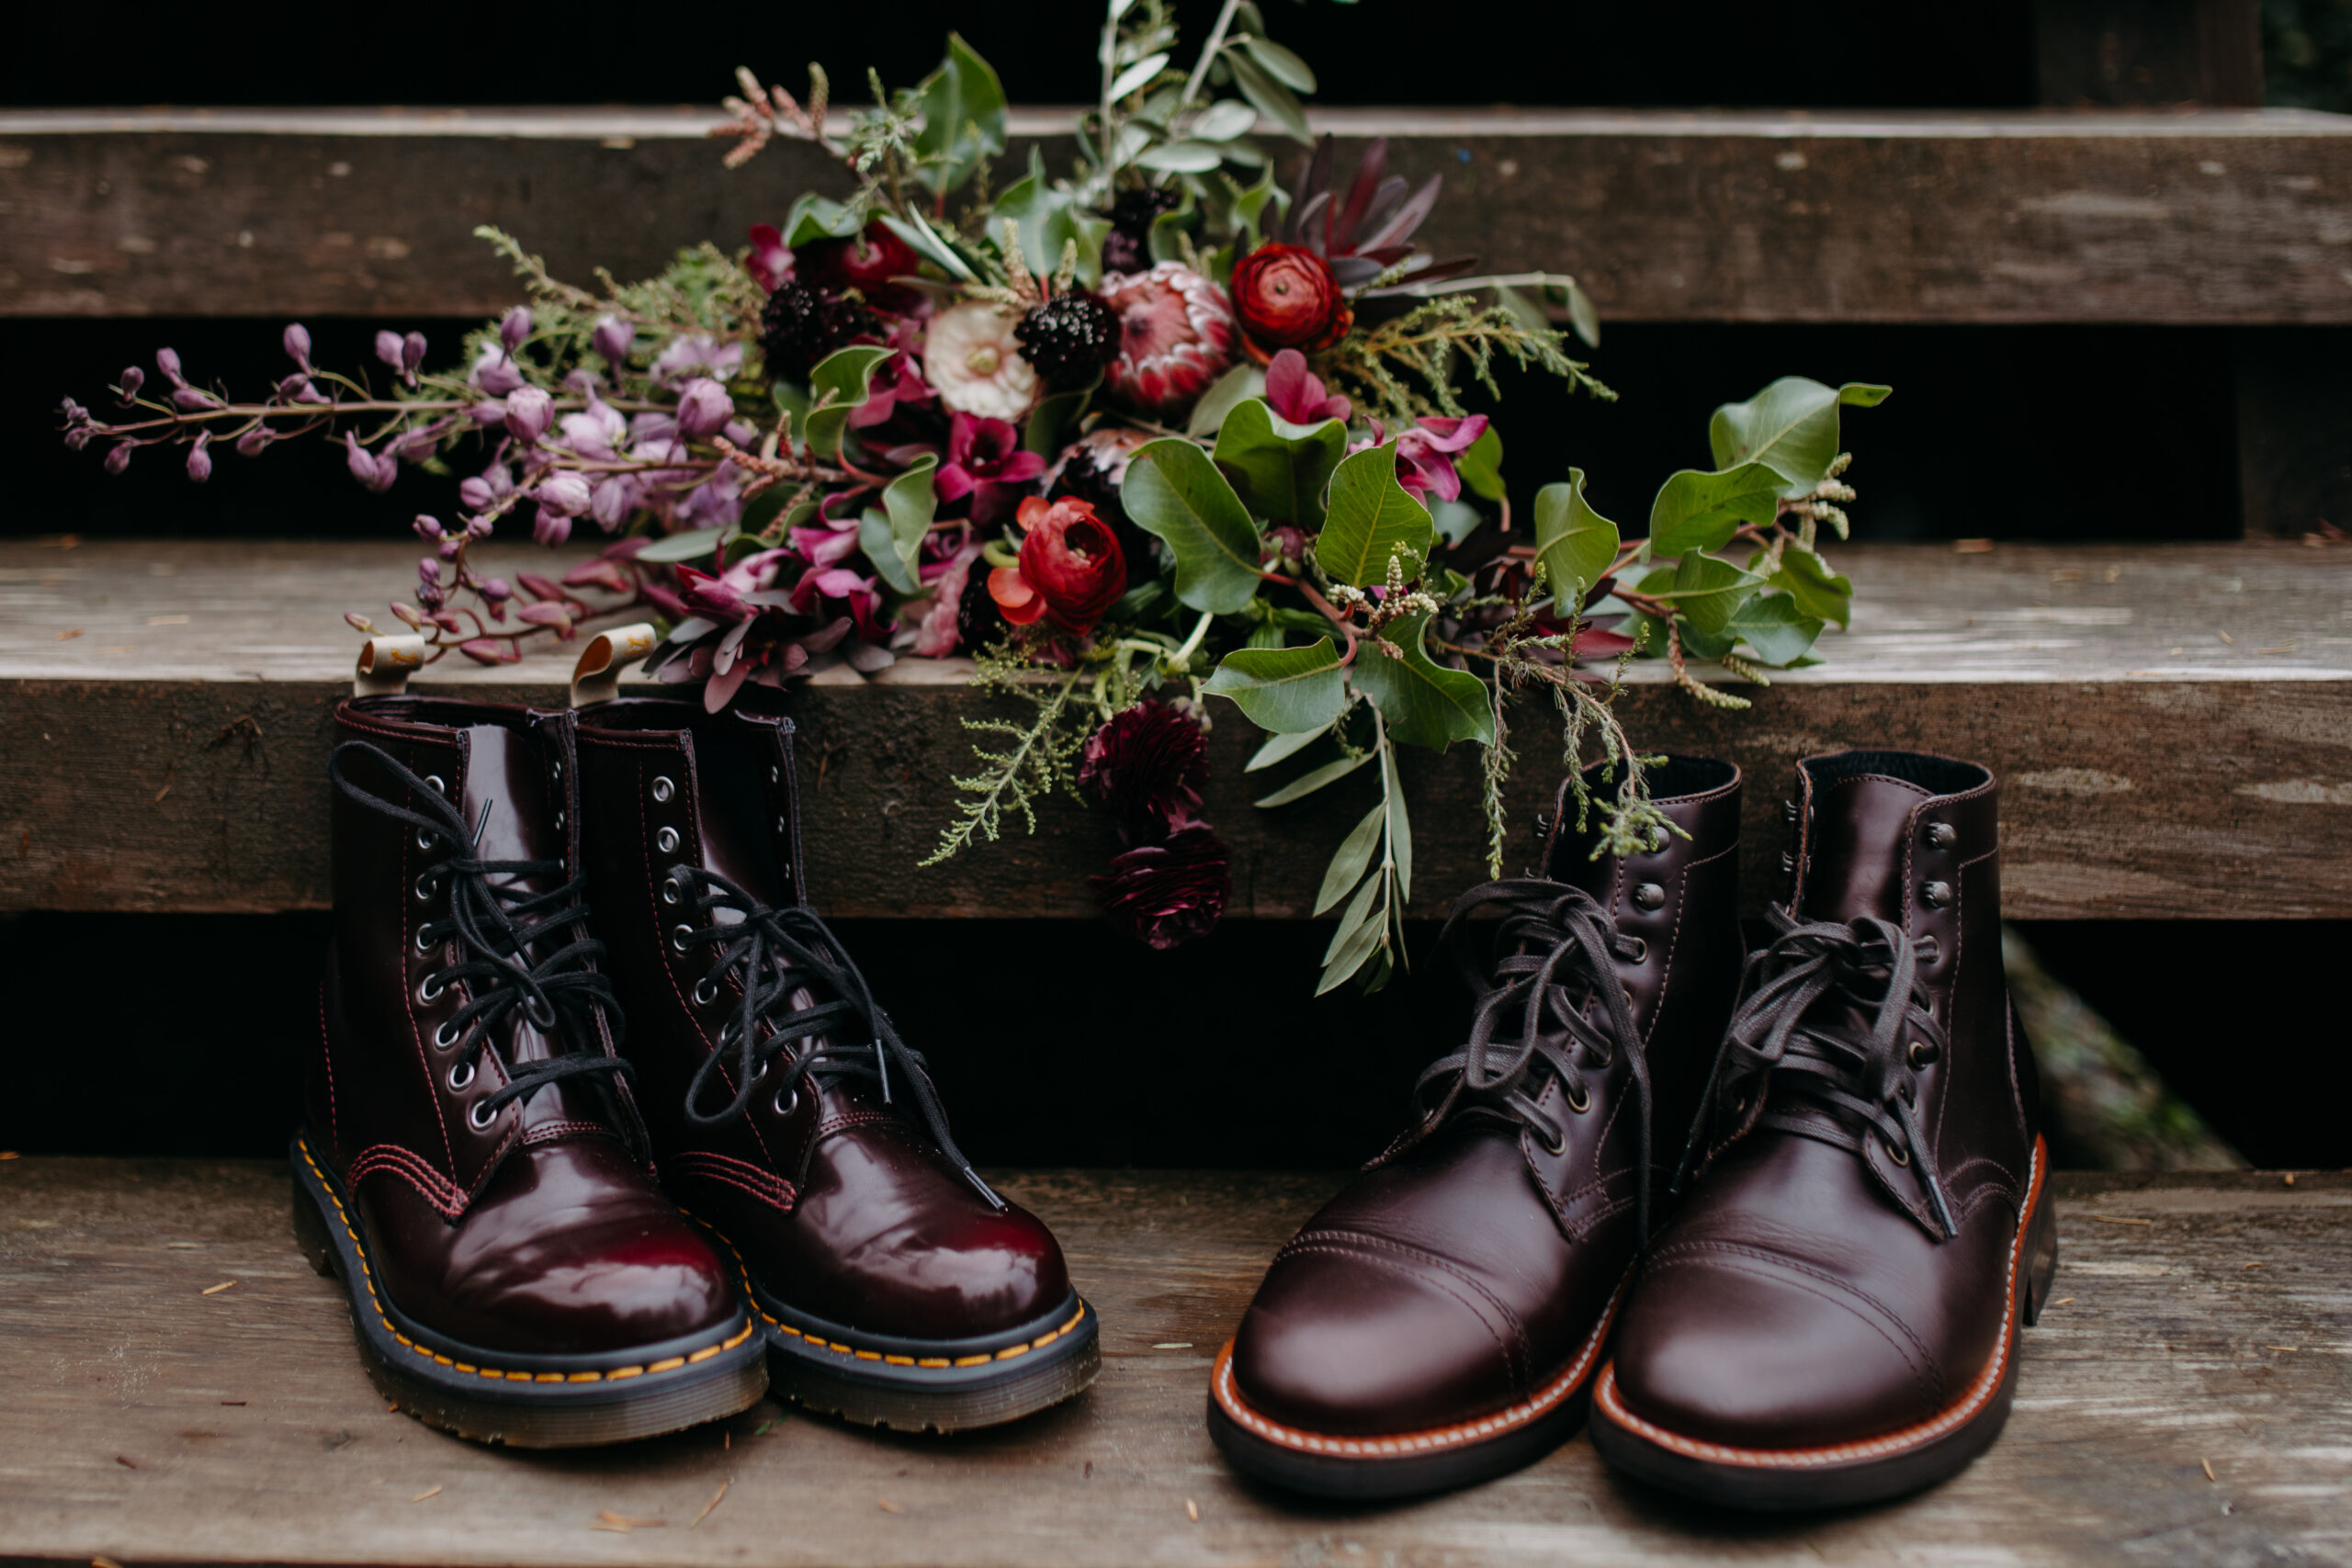 two pairs of doc marten boots sit on stairs with bouquet of flowers on step behind them